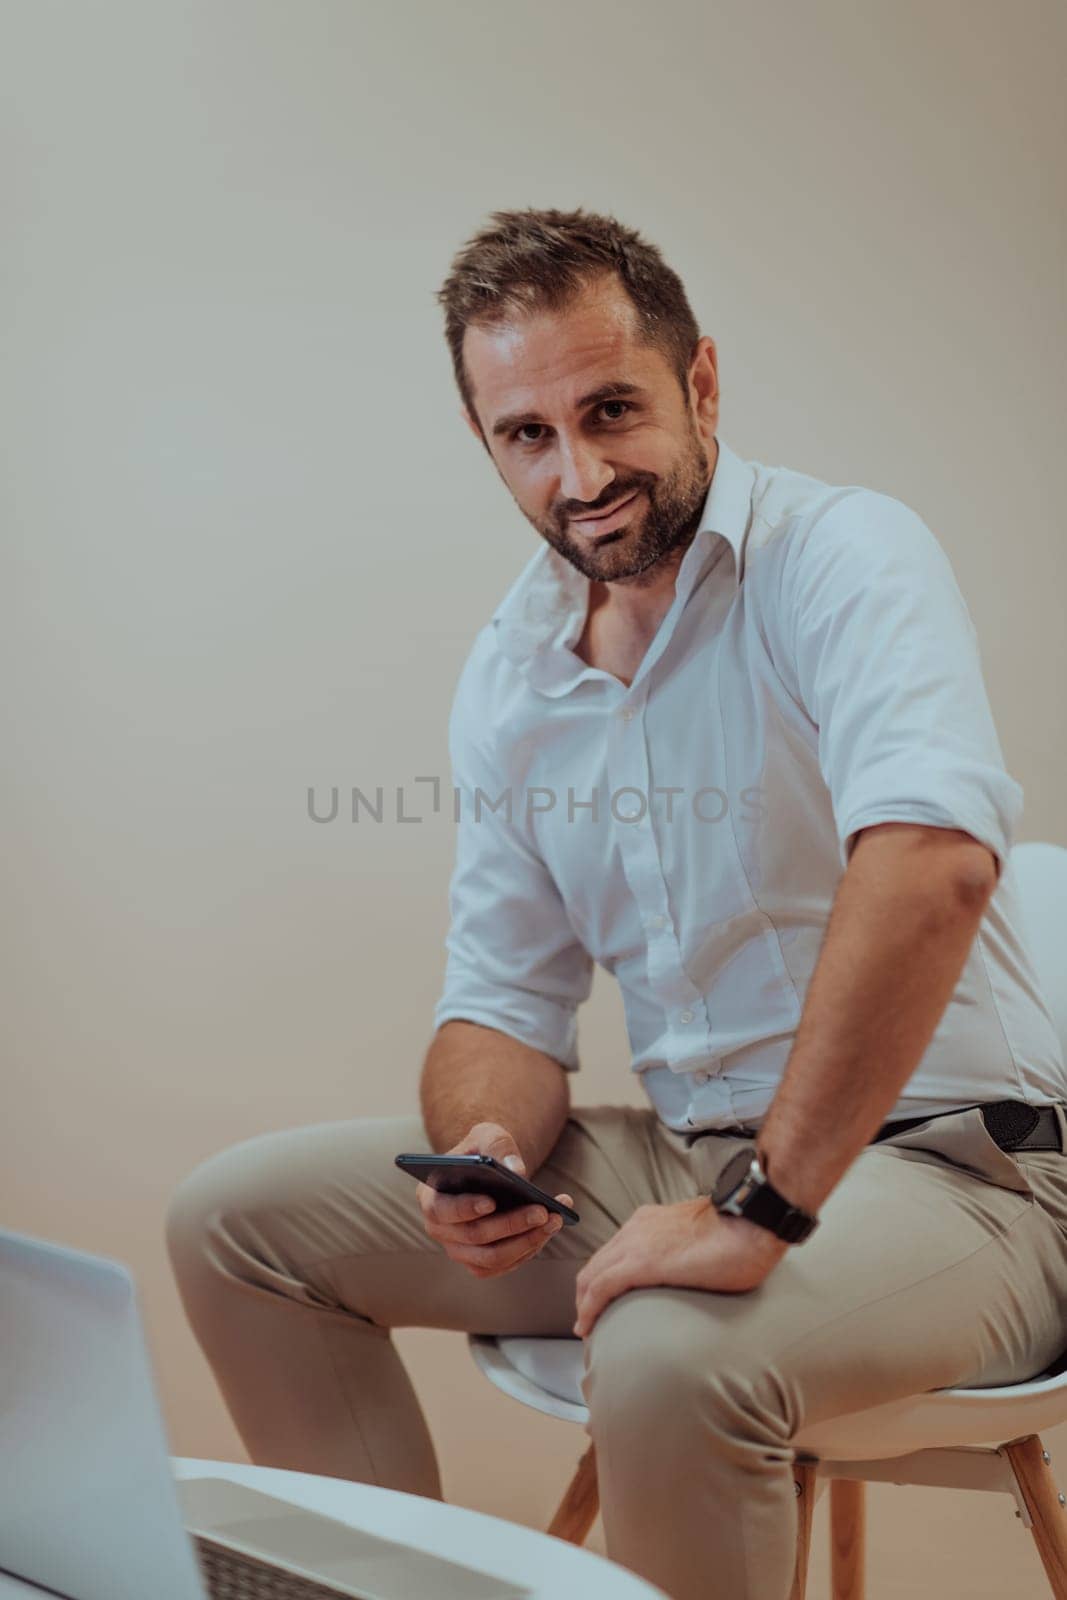 A confident businessman sitting and using laptop and smartphone with a determined expression, while a beige background enhances the professional atmosphere, showcasing his productivity and expertise. by dotshock